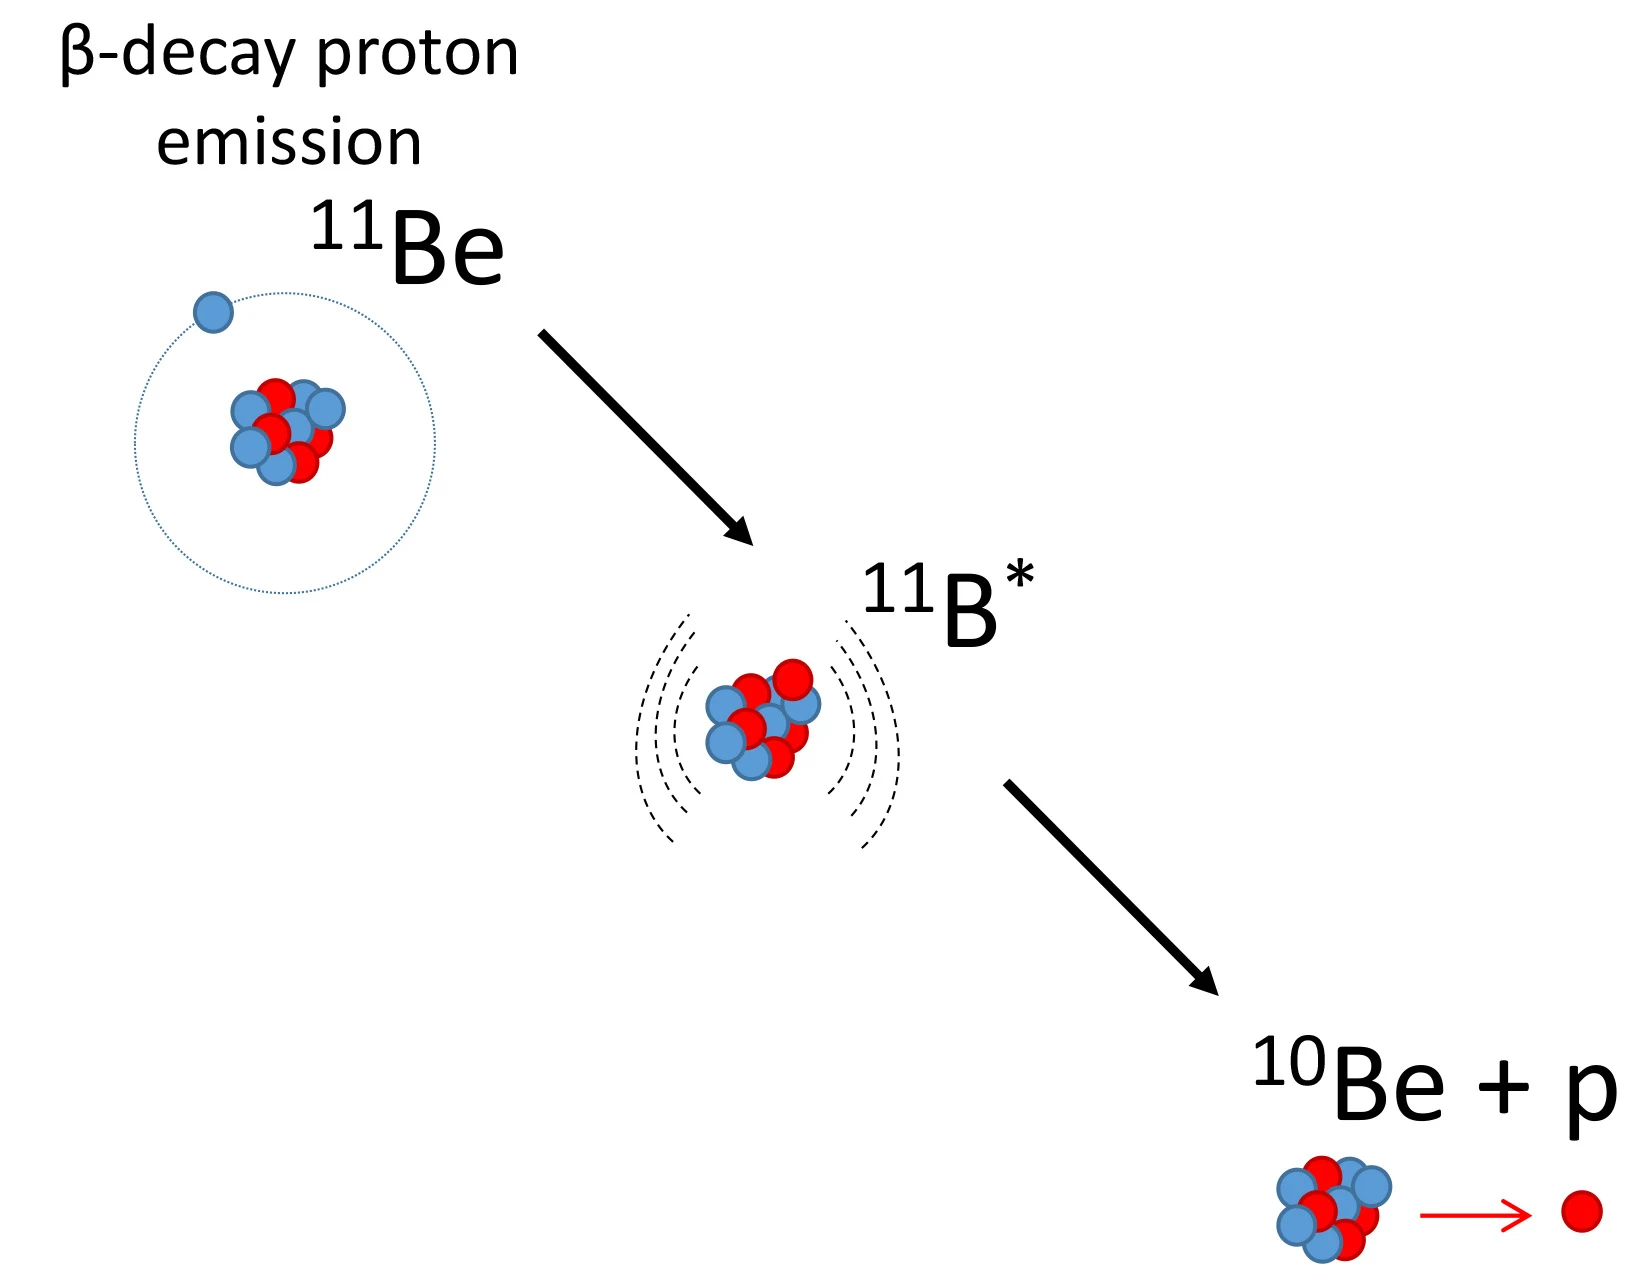 Three nuclei are shown as collections of blue orbs (neutrons) and red orbs (protons). A scheme shows beryllium-11’s core with 10 protons and neutrons being orbited by a single neutron, forming a halo nucleus. This nucleus goes through beta-decay proton emission, first becoming boron-11 (shown in an excited state denoted as 11B*), then beryllium-10 plus a proton. 